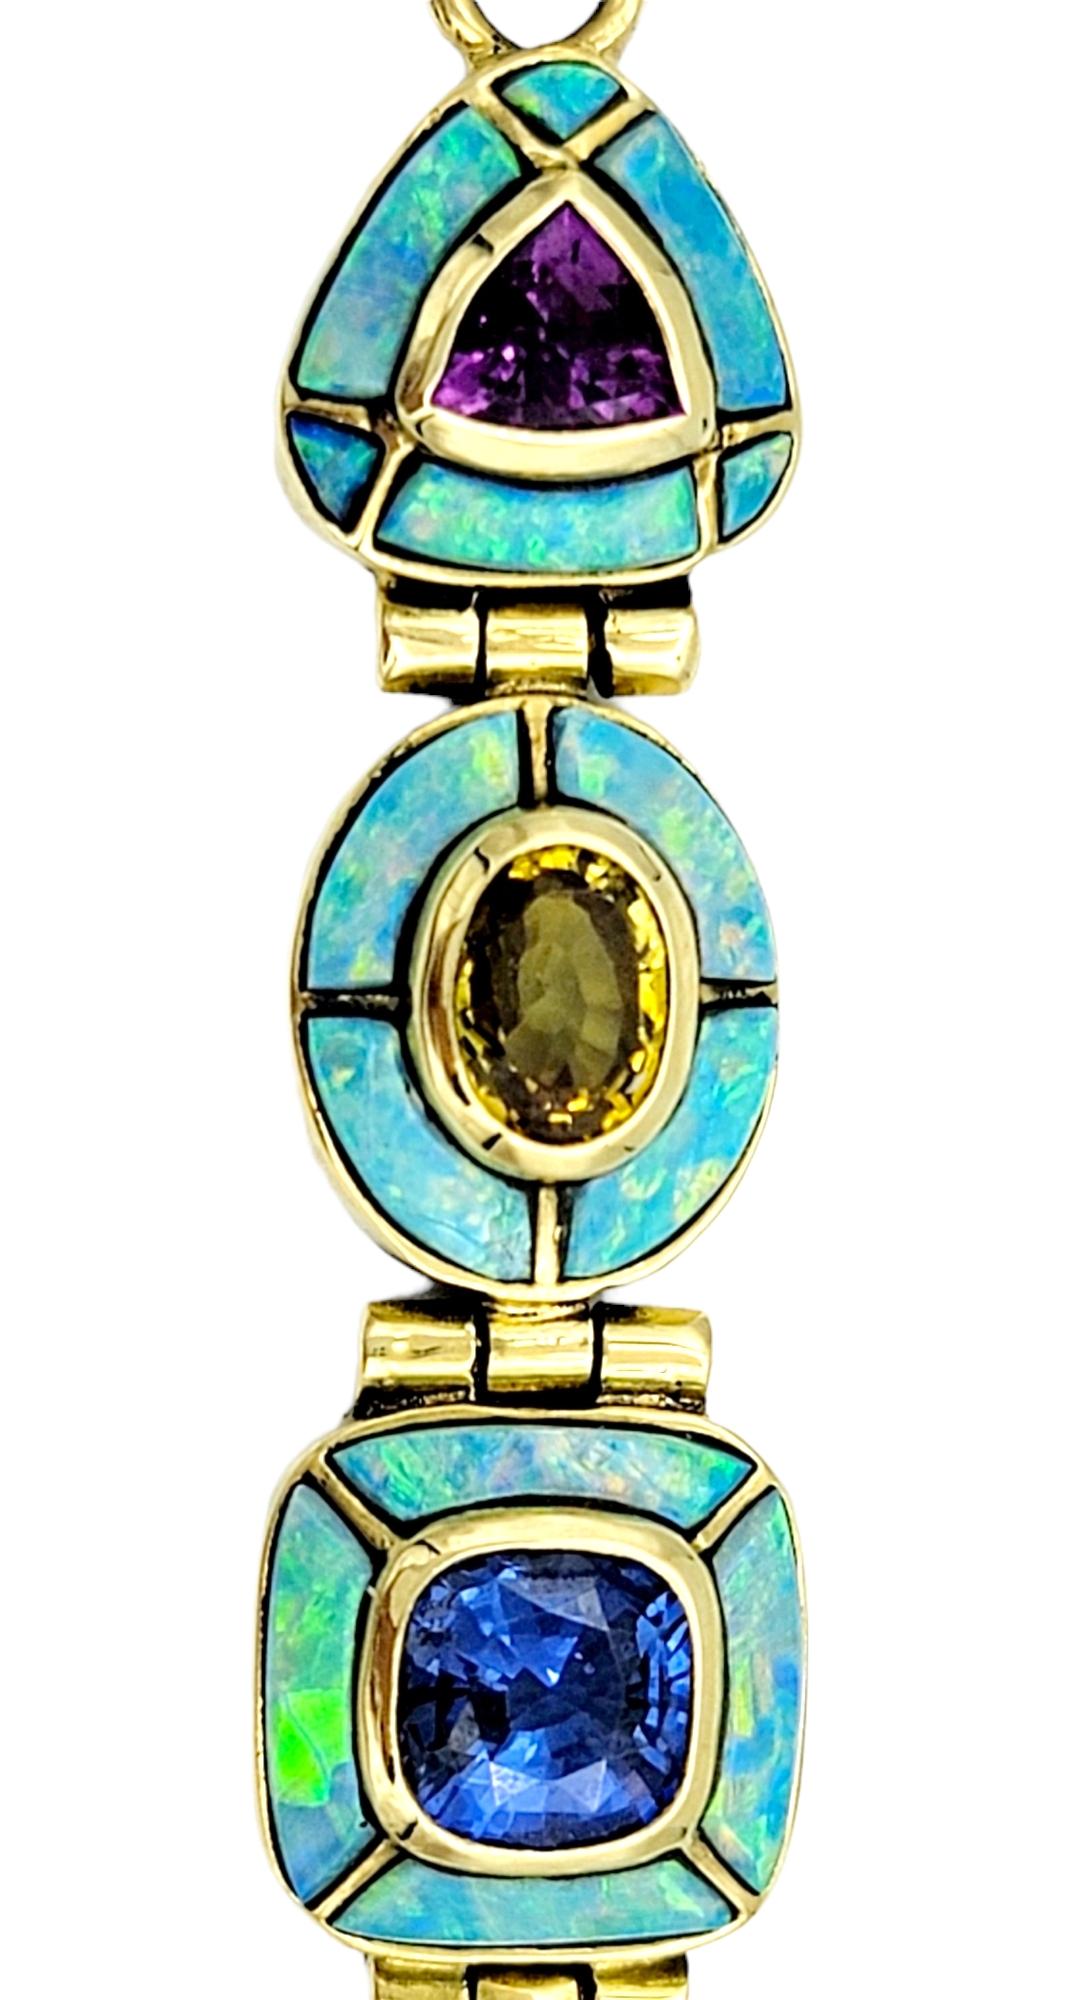 This 18 karat yellow gold pendant is a true work of art. Adorned with an exquisite array of sapphire gemstones, a captivating tourmaline, and encircled by a delicate inlay of blue opal, this piece would make an excellent addition to your fine